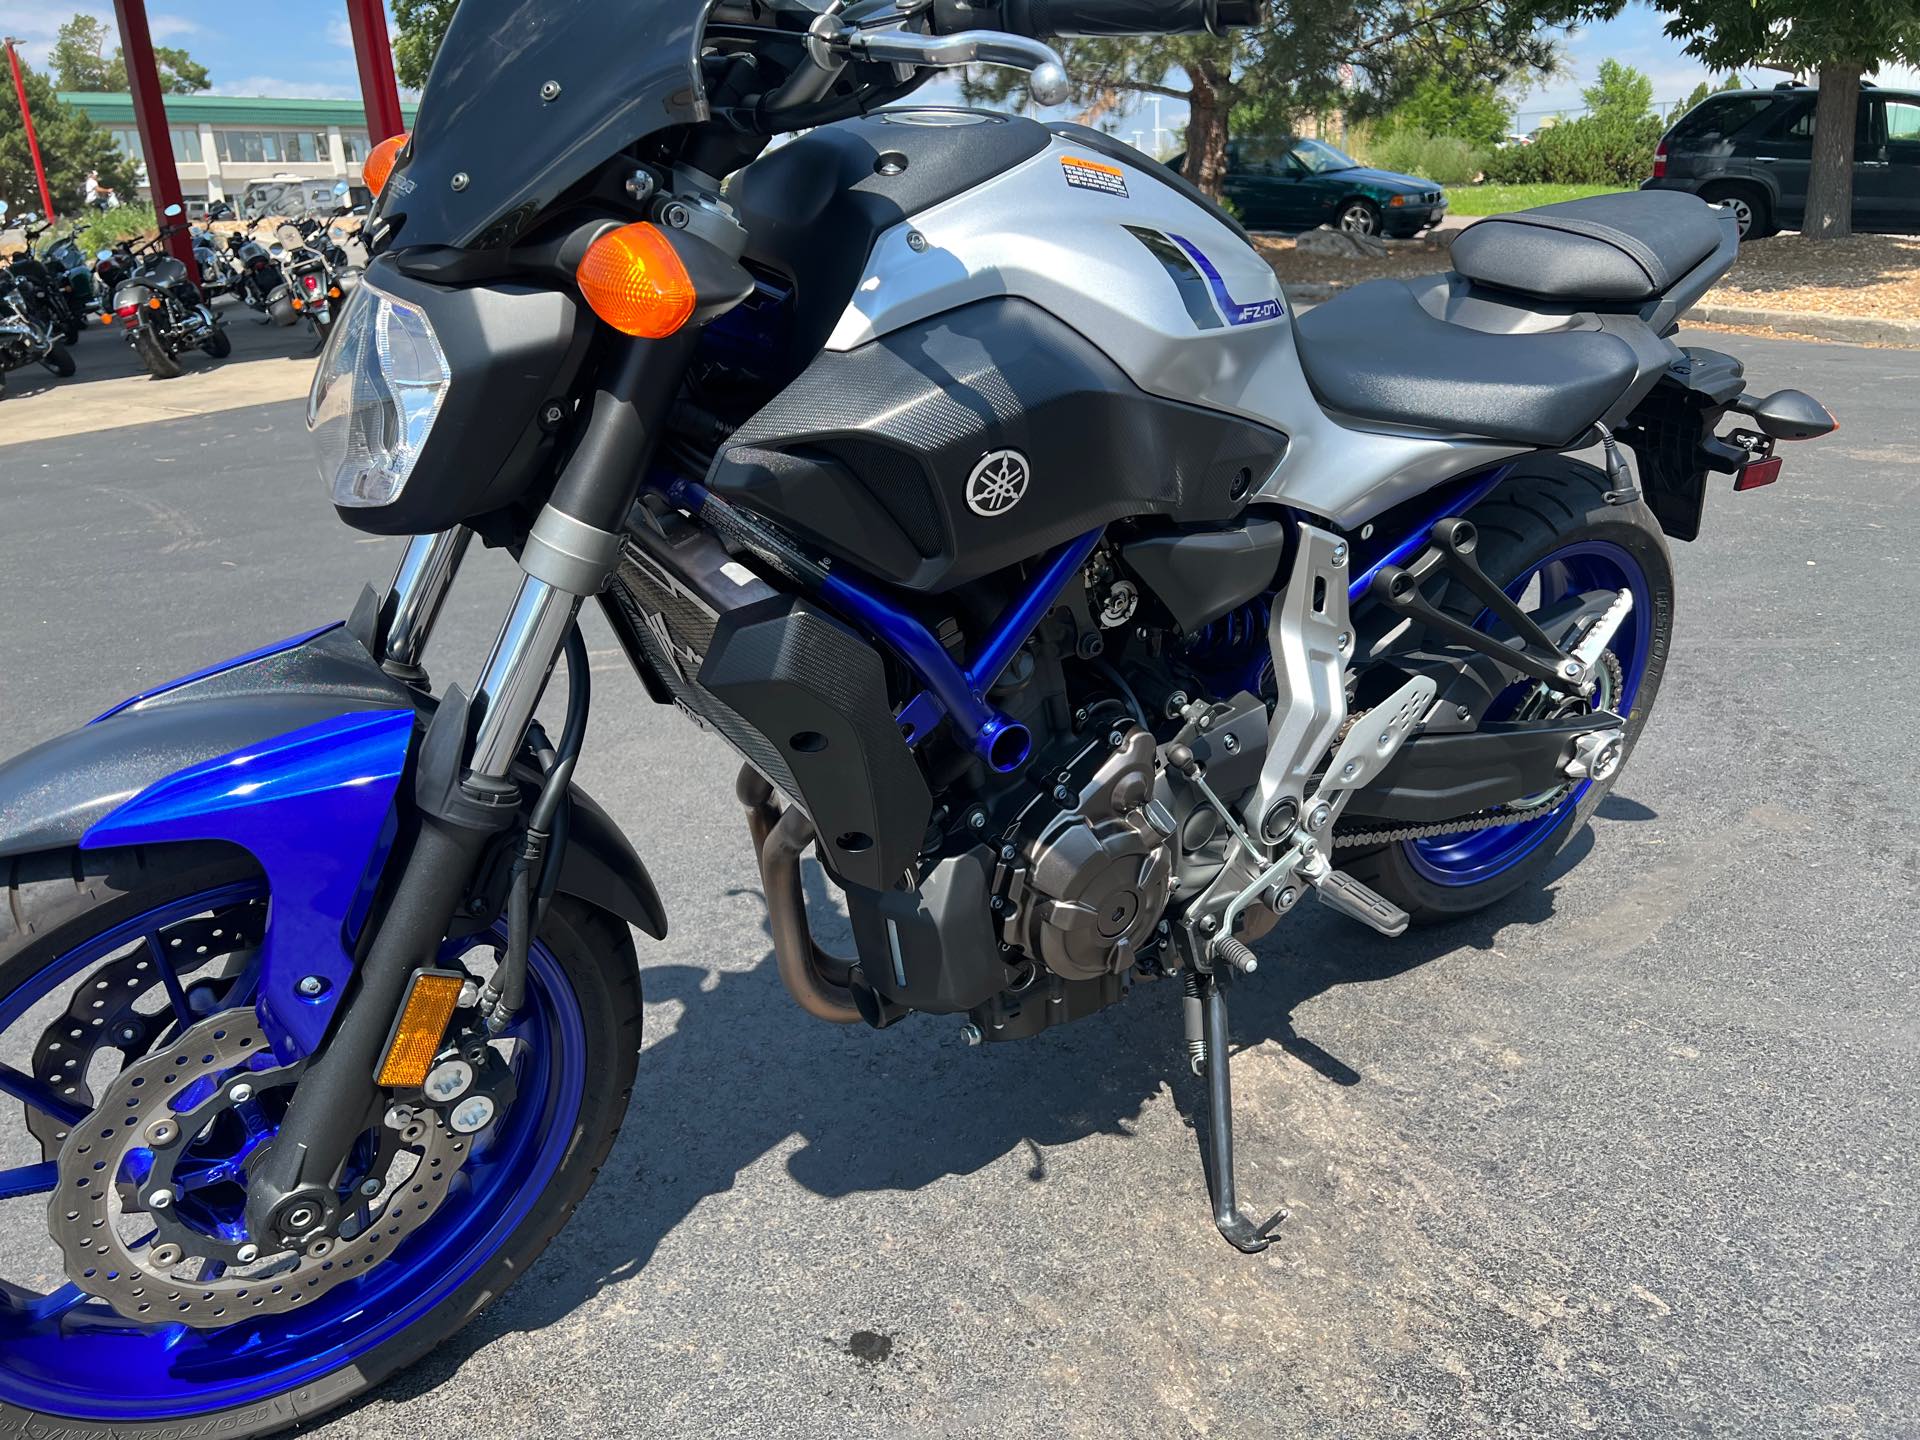 2016 Yamaha FZ 07 at Aces Motorcycles - Fort Collins